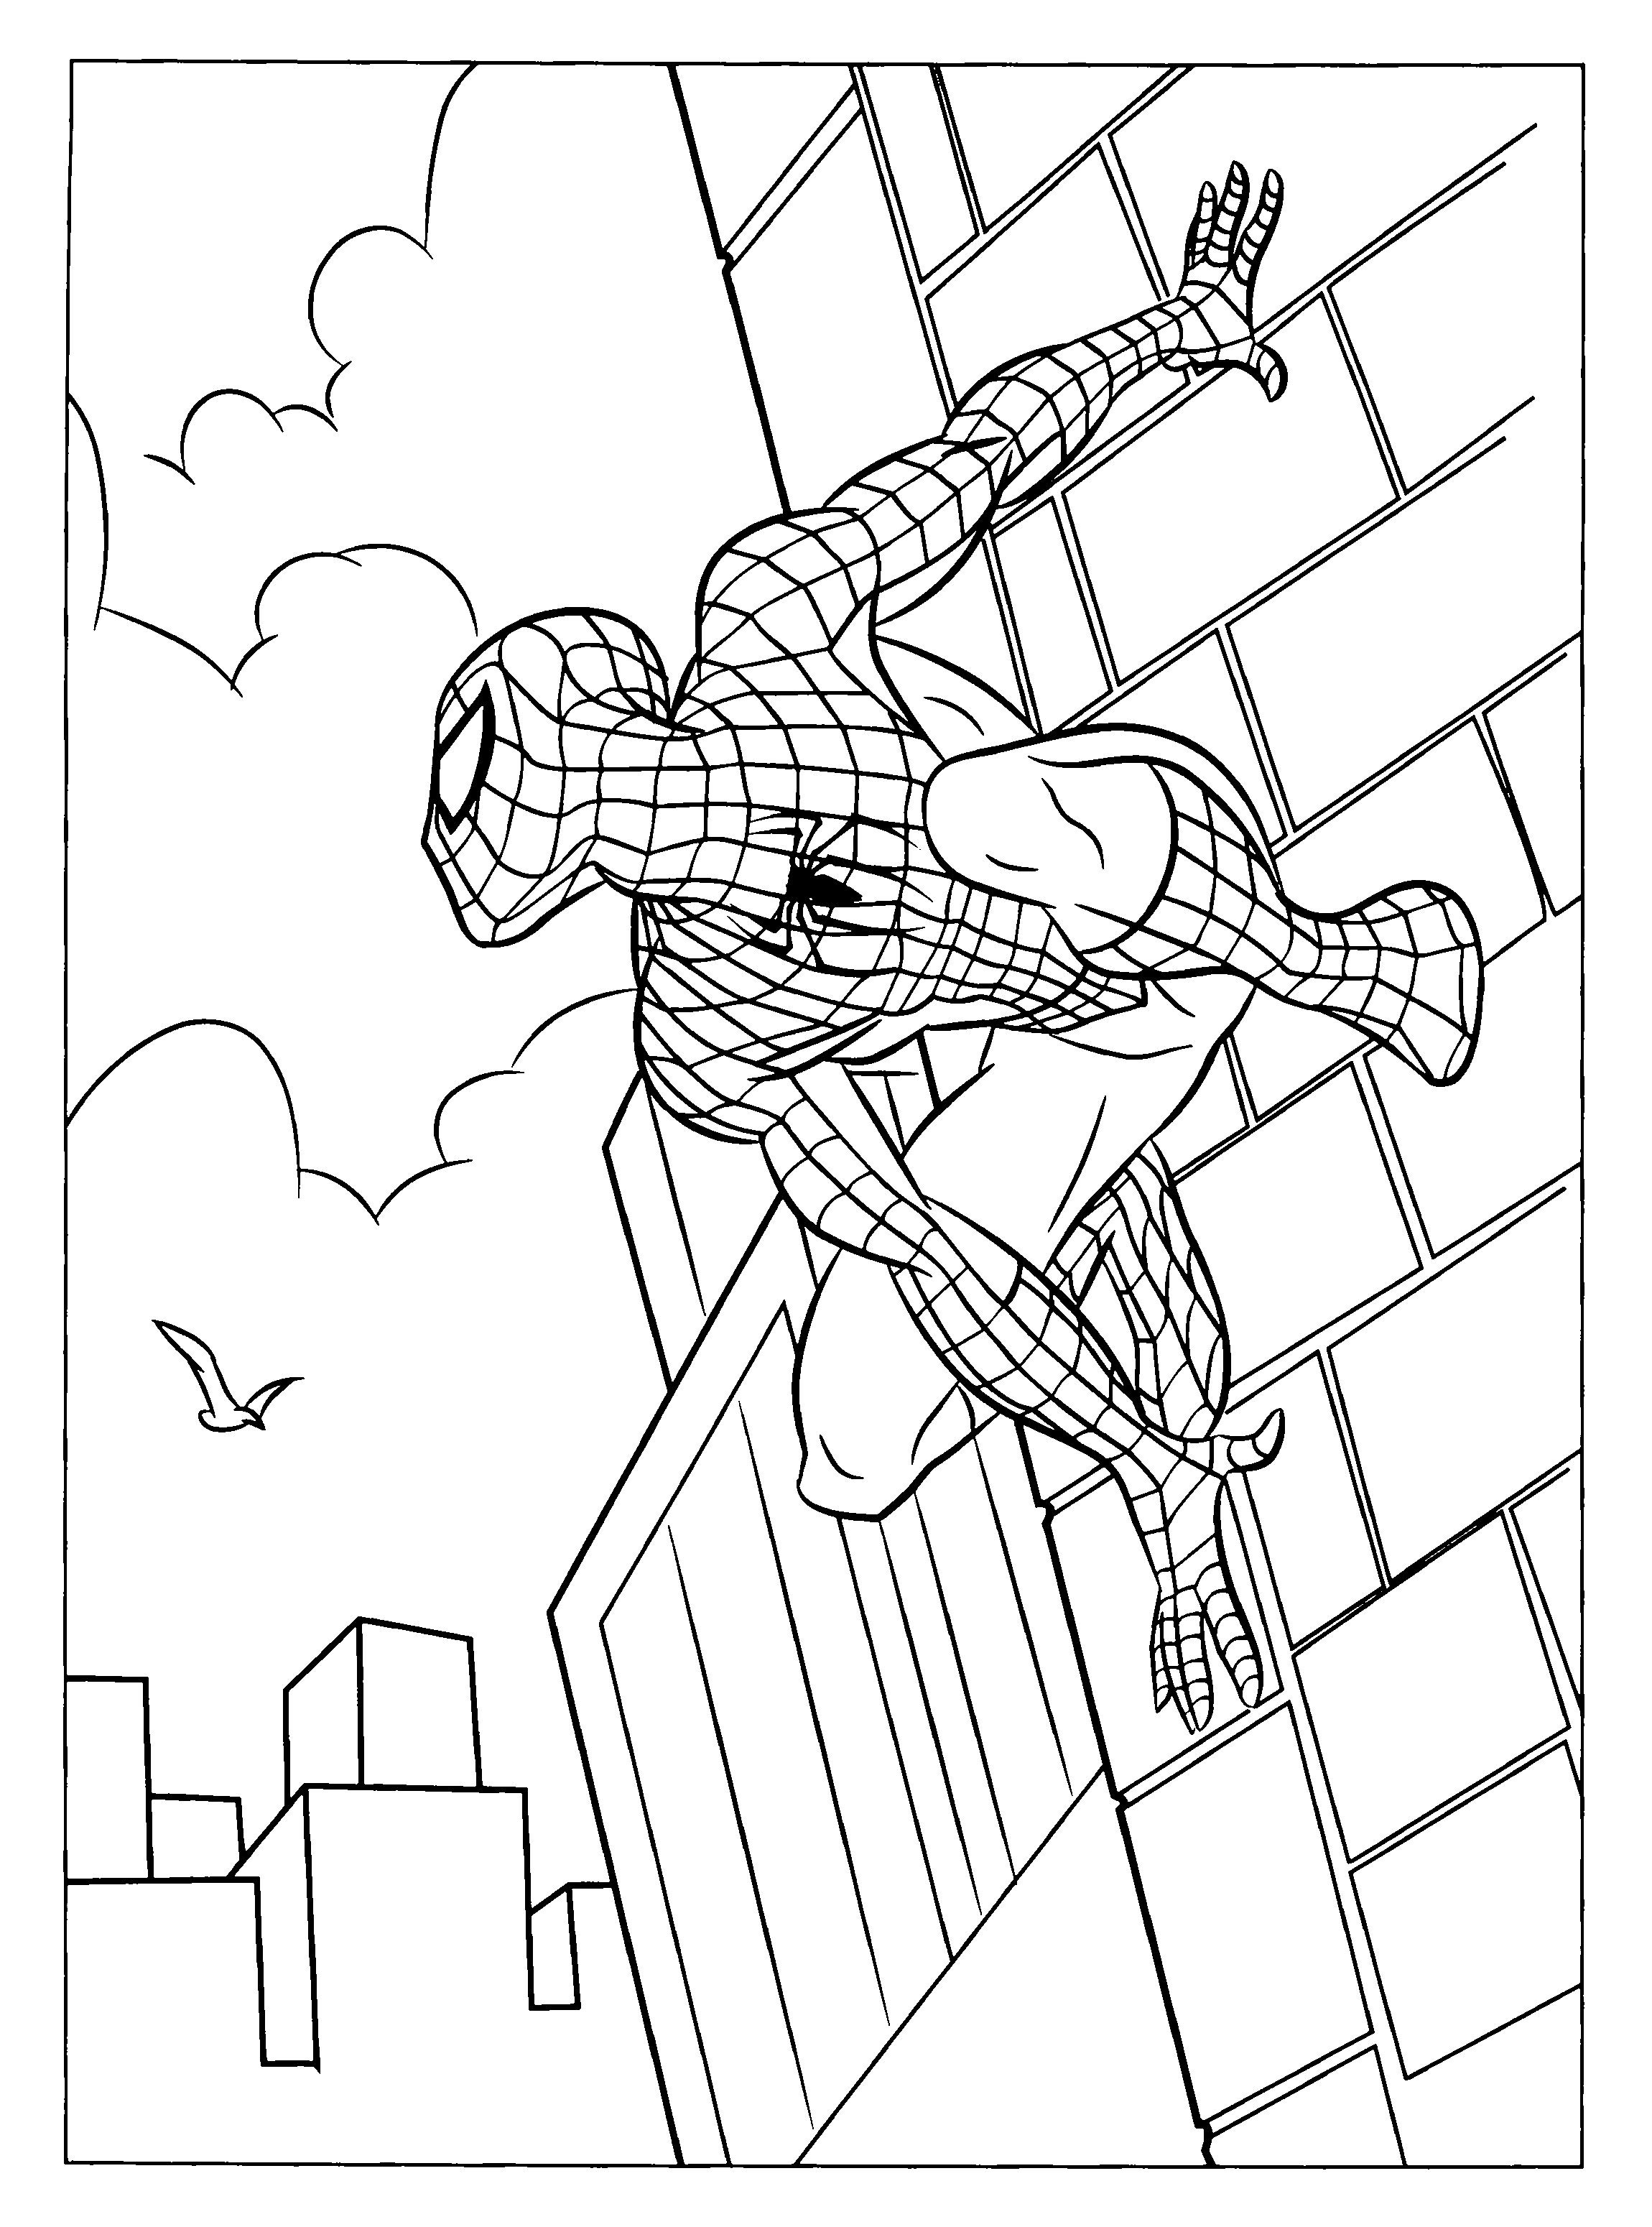 coloring-page-spiderman-3-coloring-pages-1